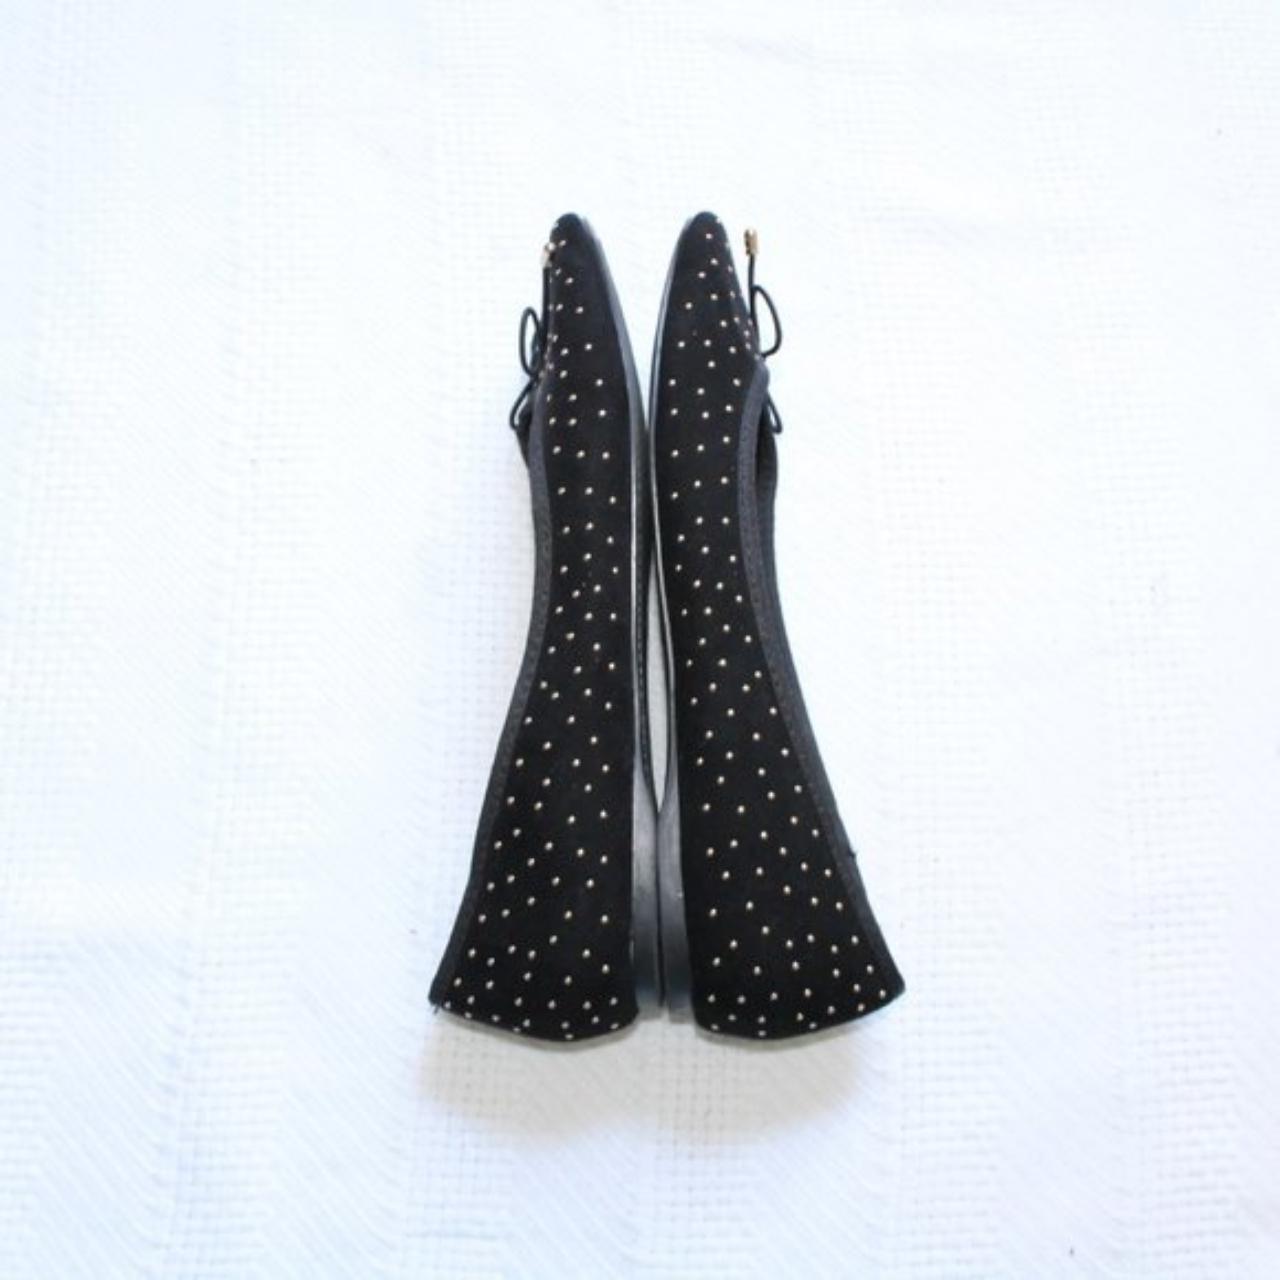 Product Image 3 - Outer Material: Fabric
Inner Material: Manmade
Sole: